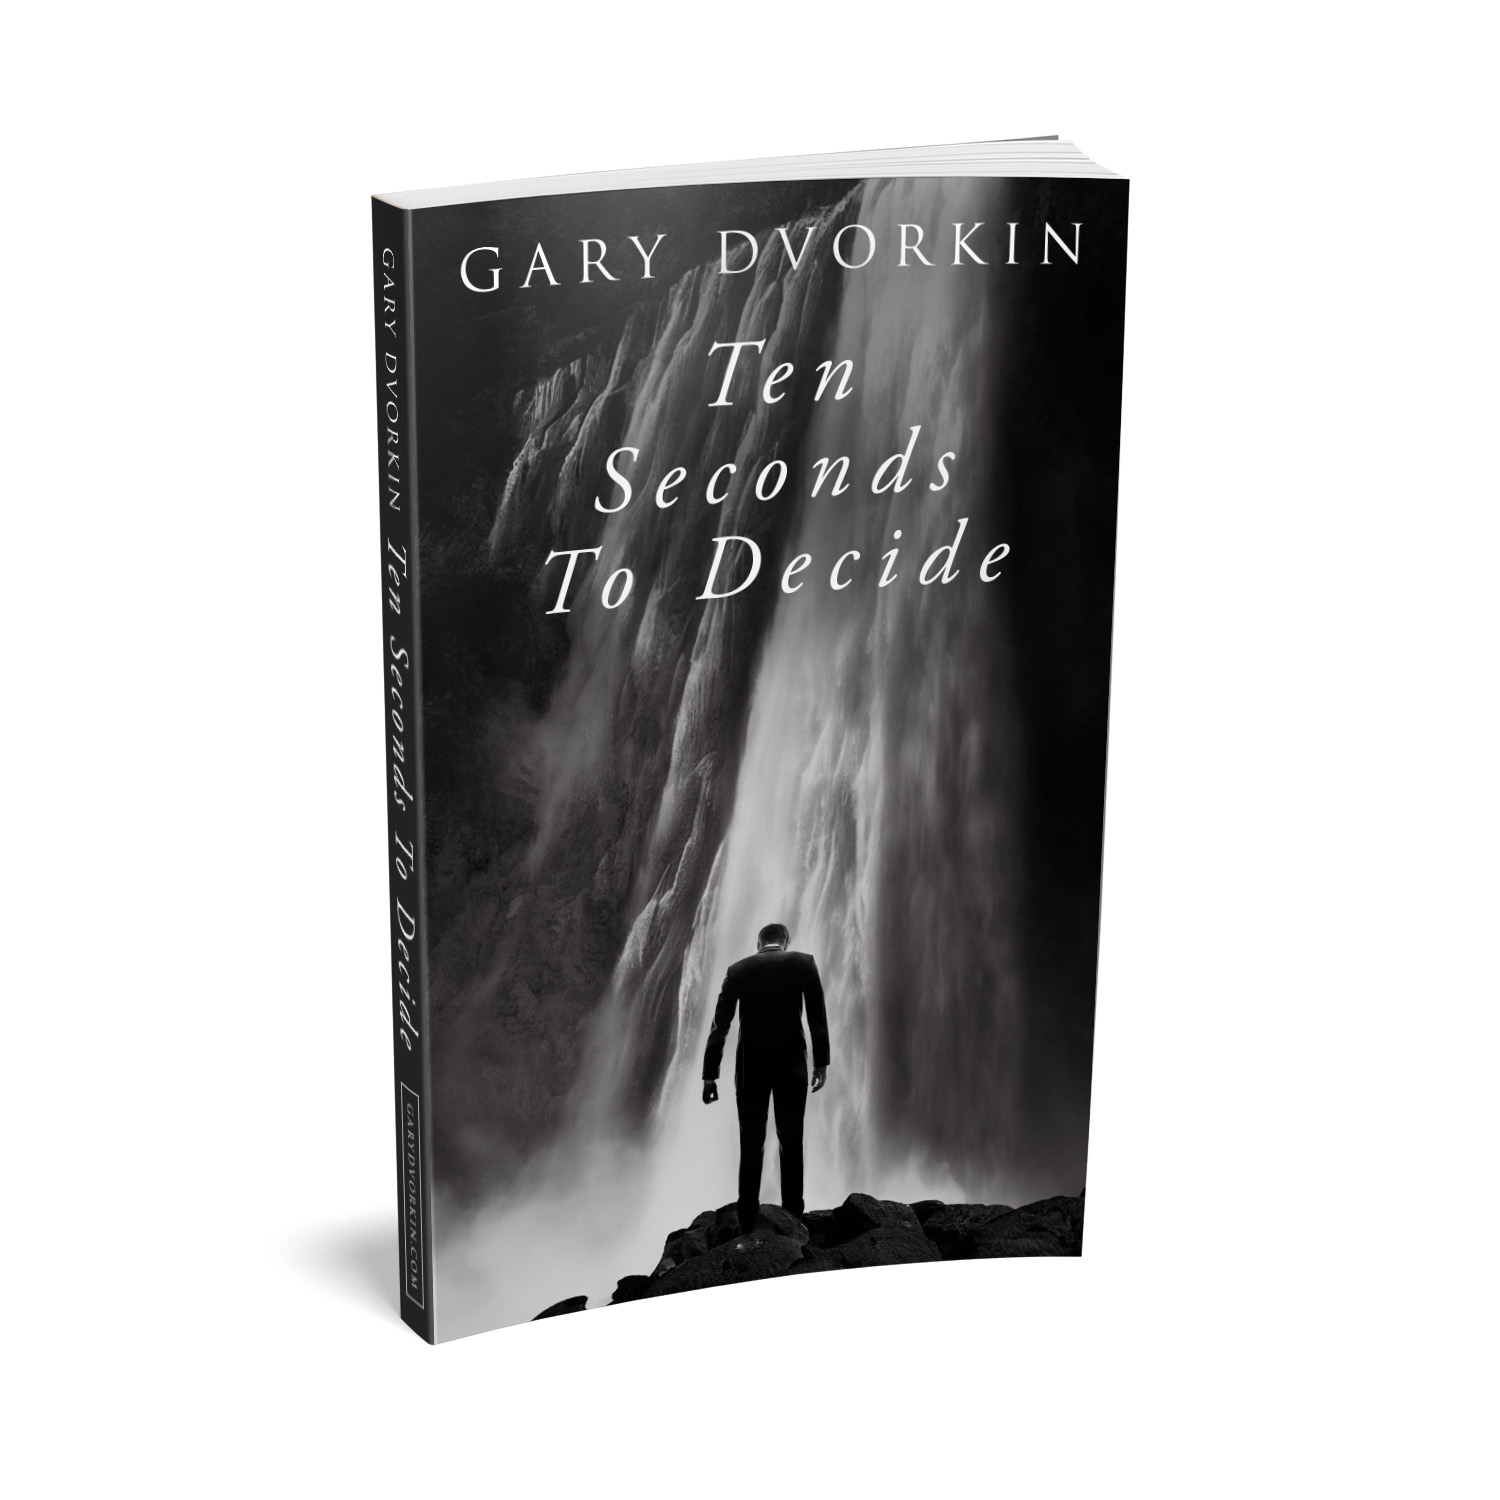 'Ten Seconds To Decide' is a neo-noir thriller about the corruption of power. The author is Gary Dvorkin. The book cover design & Interior formatting are by Mark Thomas. To learn more about what Mark could do for your book, please visit coverness.com.